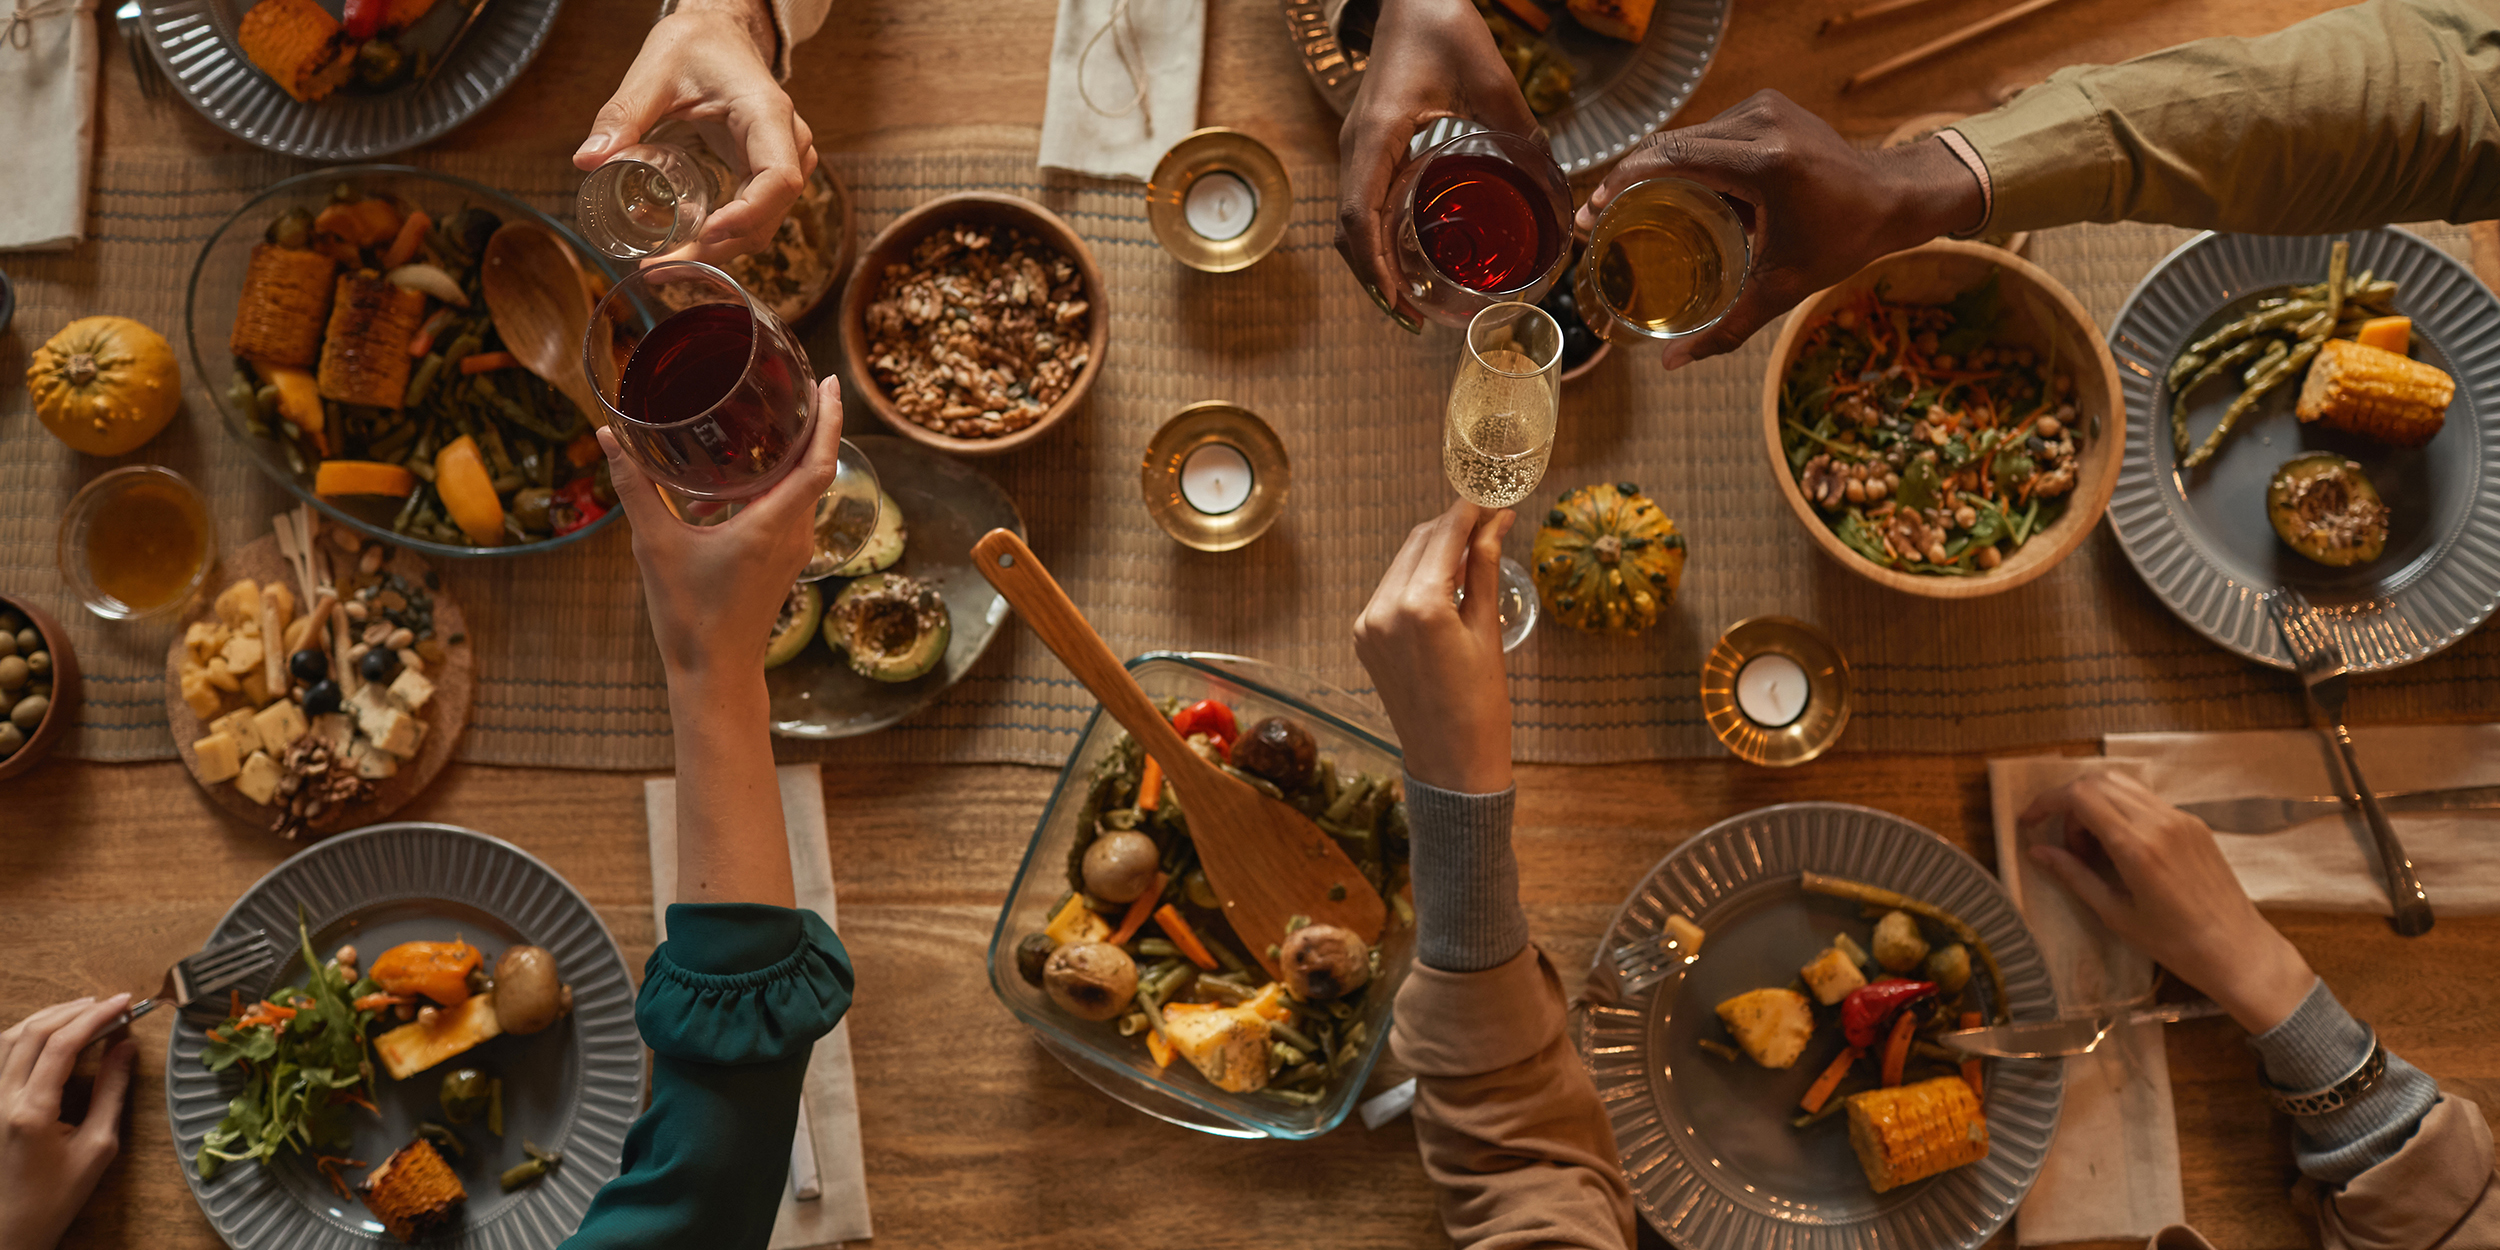 Above view of multi-ethnic group of people enjoying a Thanksgiving feast. They clink glasses and have plates full of food. Dishes of casseroles, potatoes and more are scattered across the tabletop.